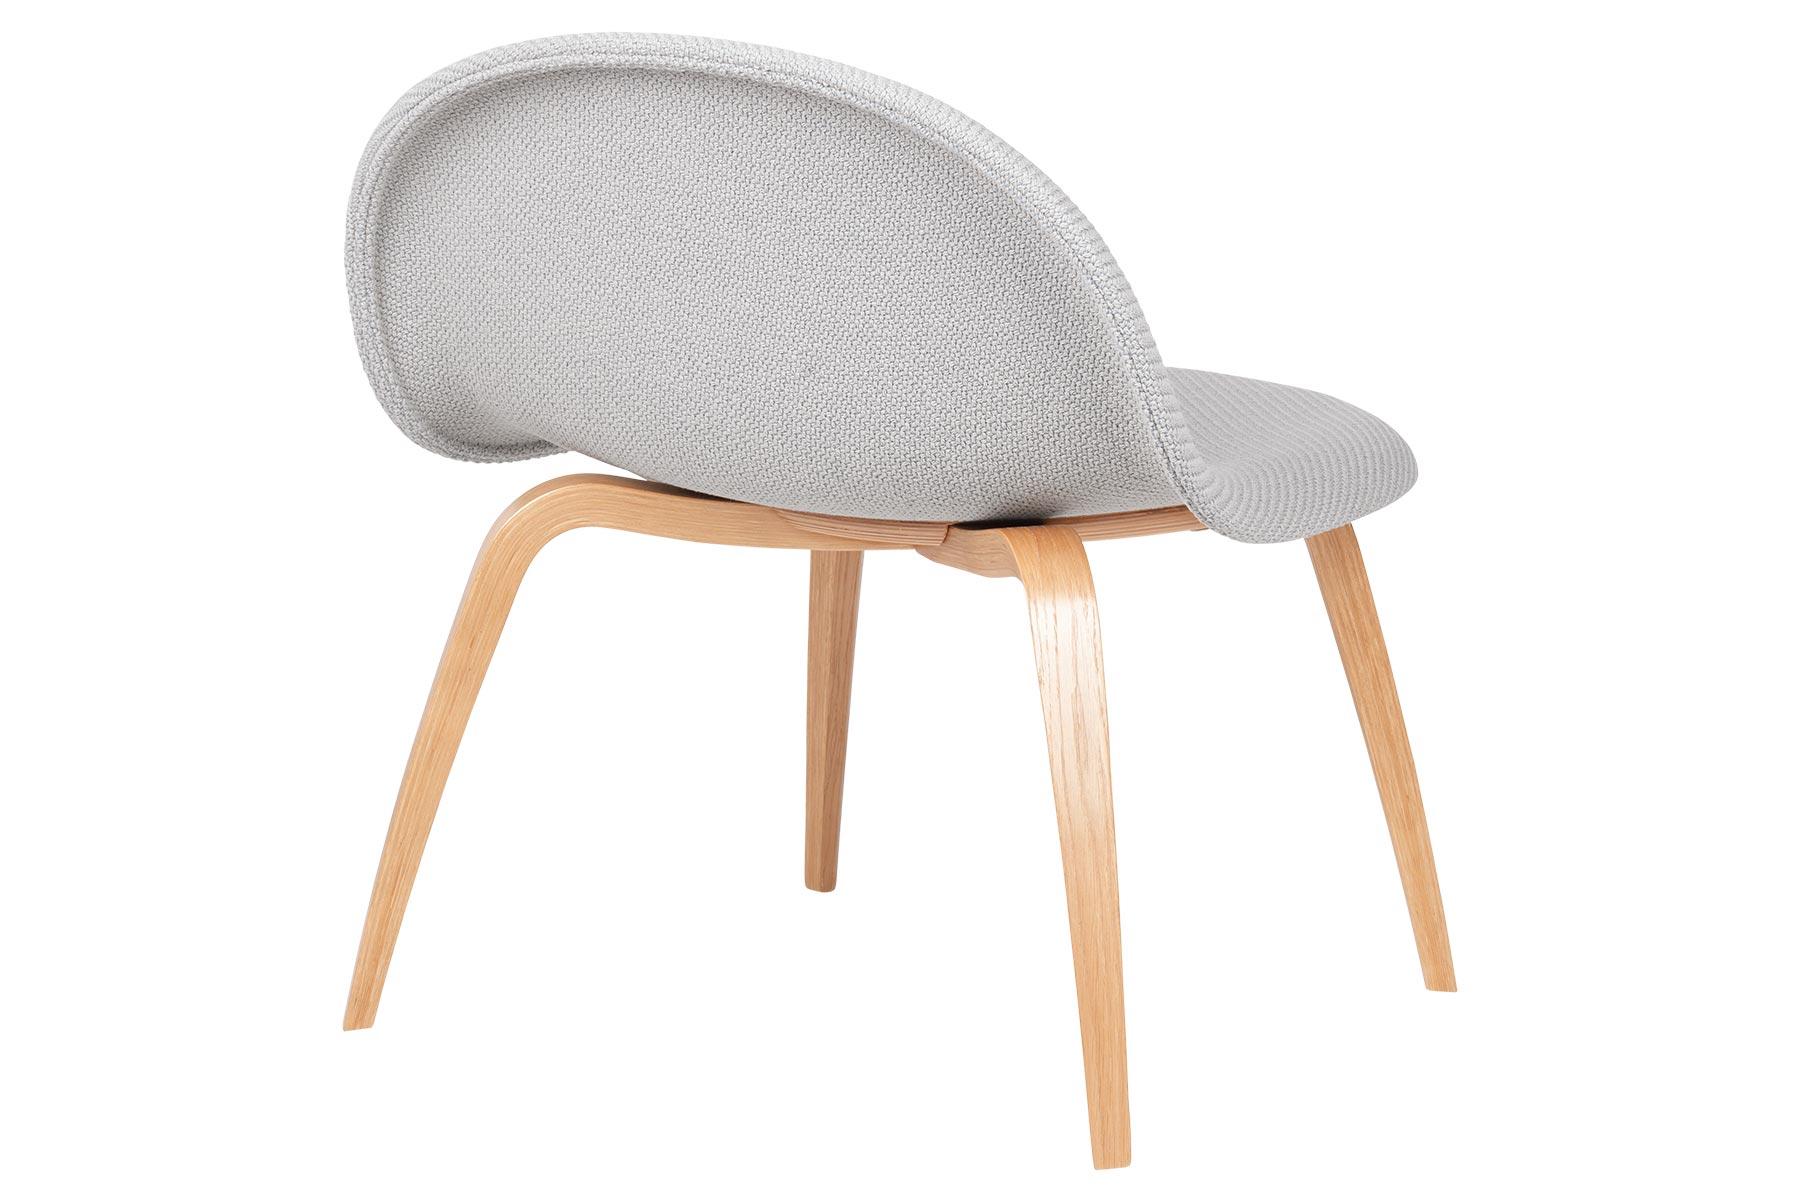 Designed by the creative partnership of Komplot Design, the GUBI lounge chair is the first furniture design to be based on the innovative technique of moulding three-dimensional veneer. The 3D design gives the lounge chair a comfortable seat and